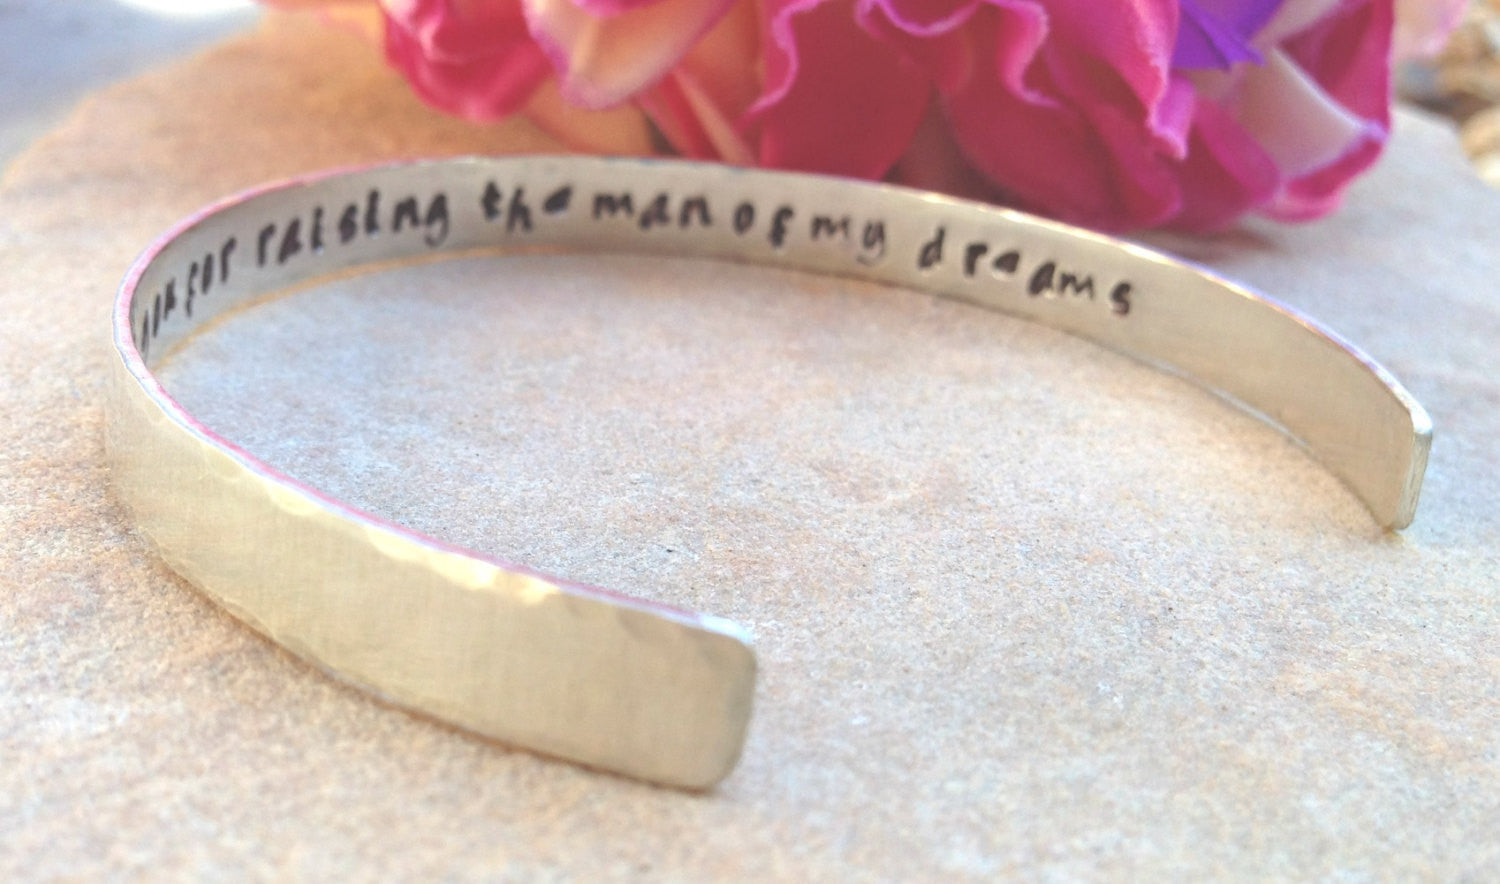 thank you for raising the man of my dreams, mother of the groom, sterling silver bracelet, secret message bracelet, cuff, personalized gift - Natashaaloha, jewelry, bracelets, necklace, keychains, fishing lures, gifts for men, charms, personalized, 